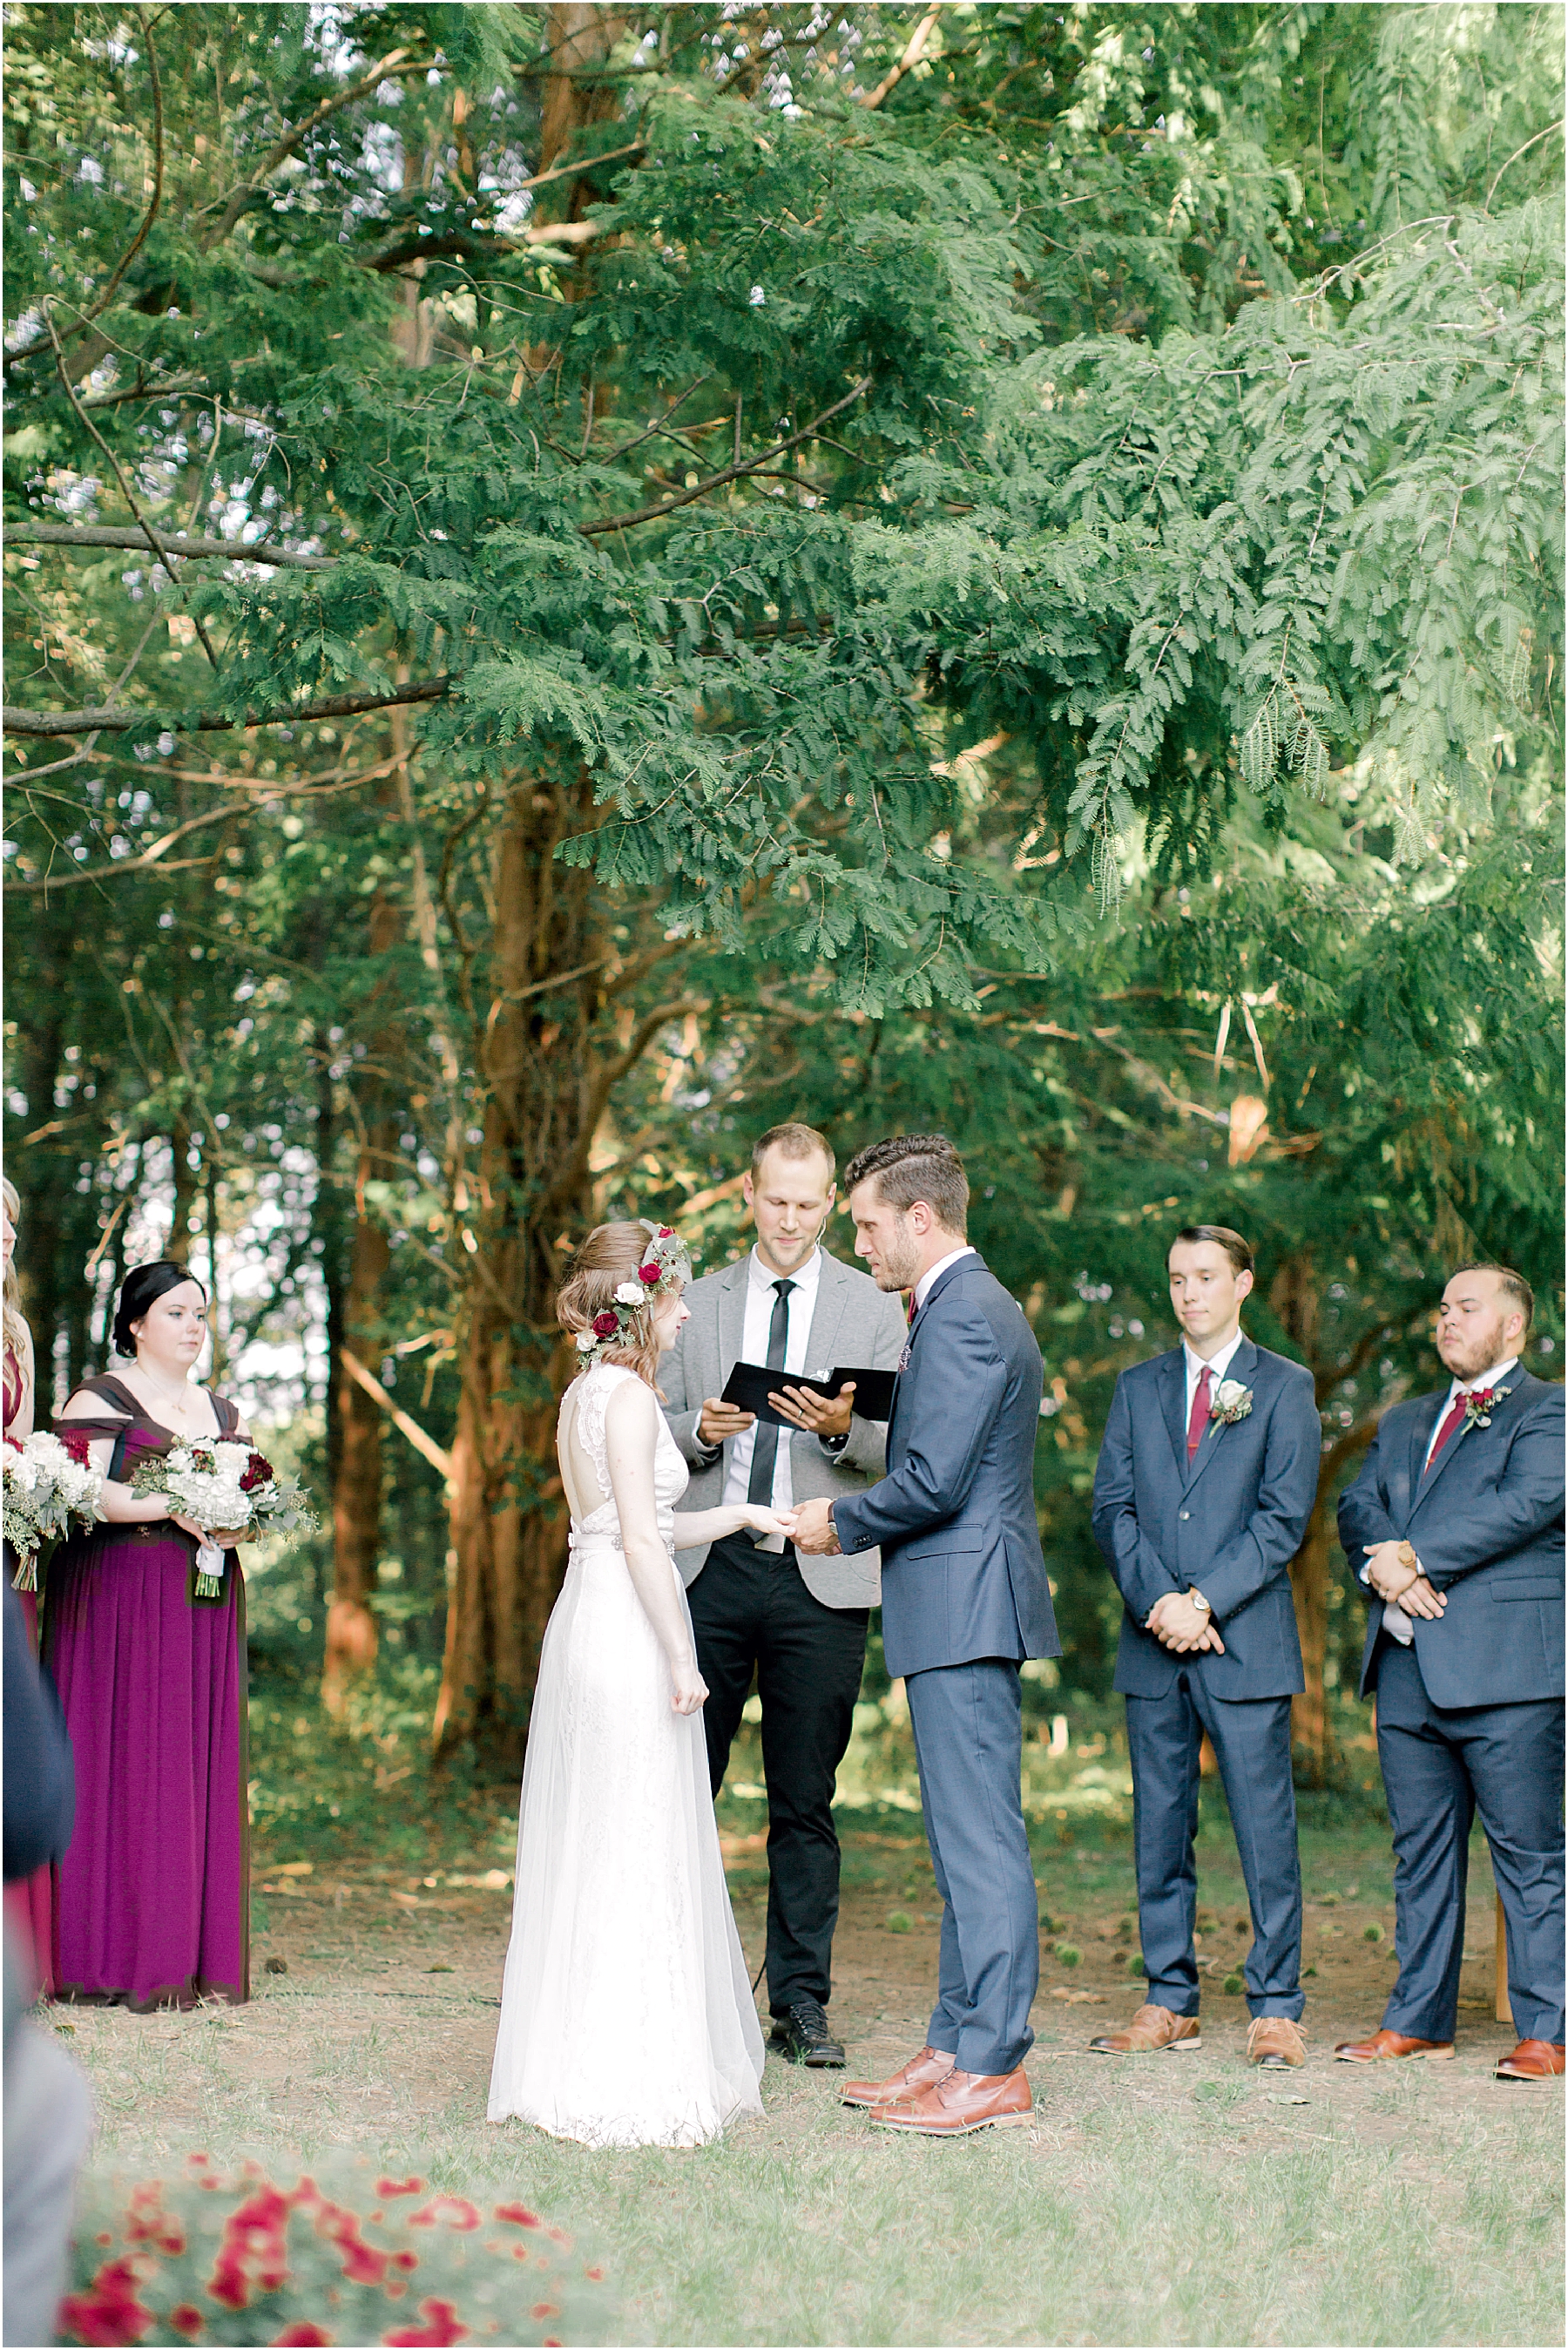 romantic wedding under the trees at midwest wedding